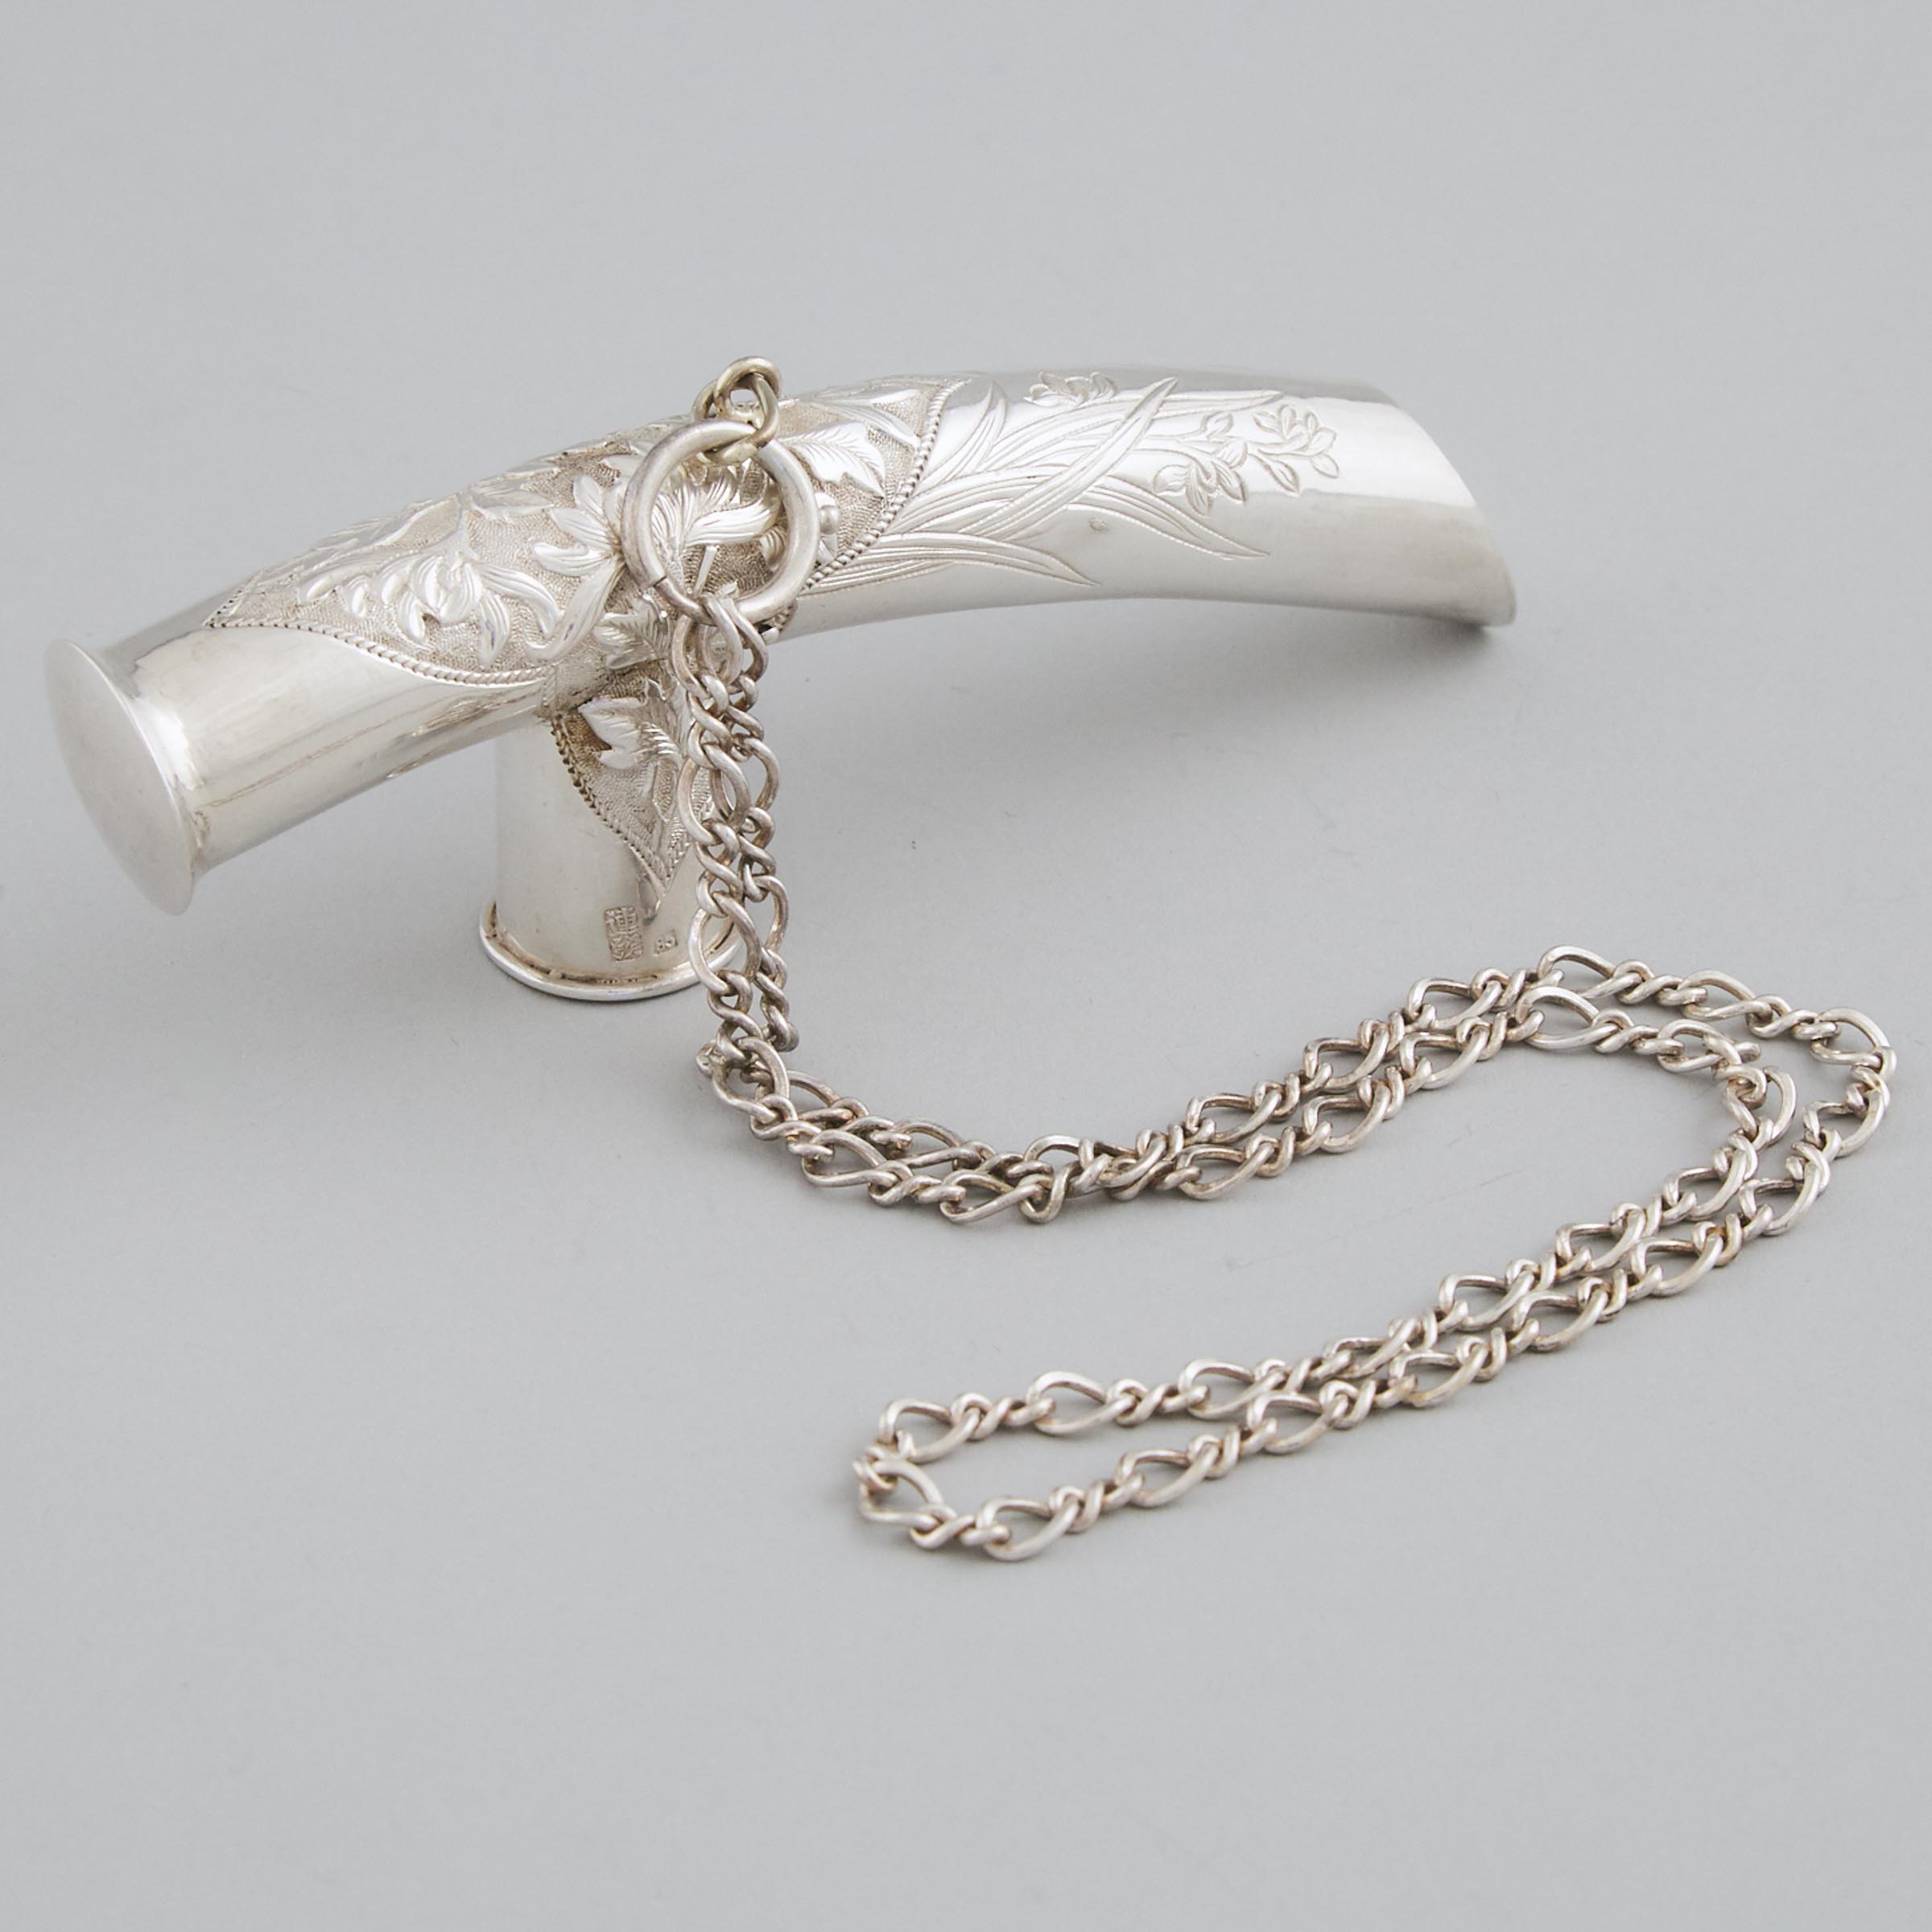 Chinese Export Silver Cane Handle, Lian Fa, early 20th century